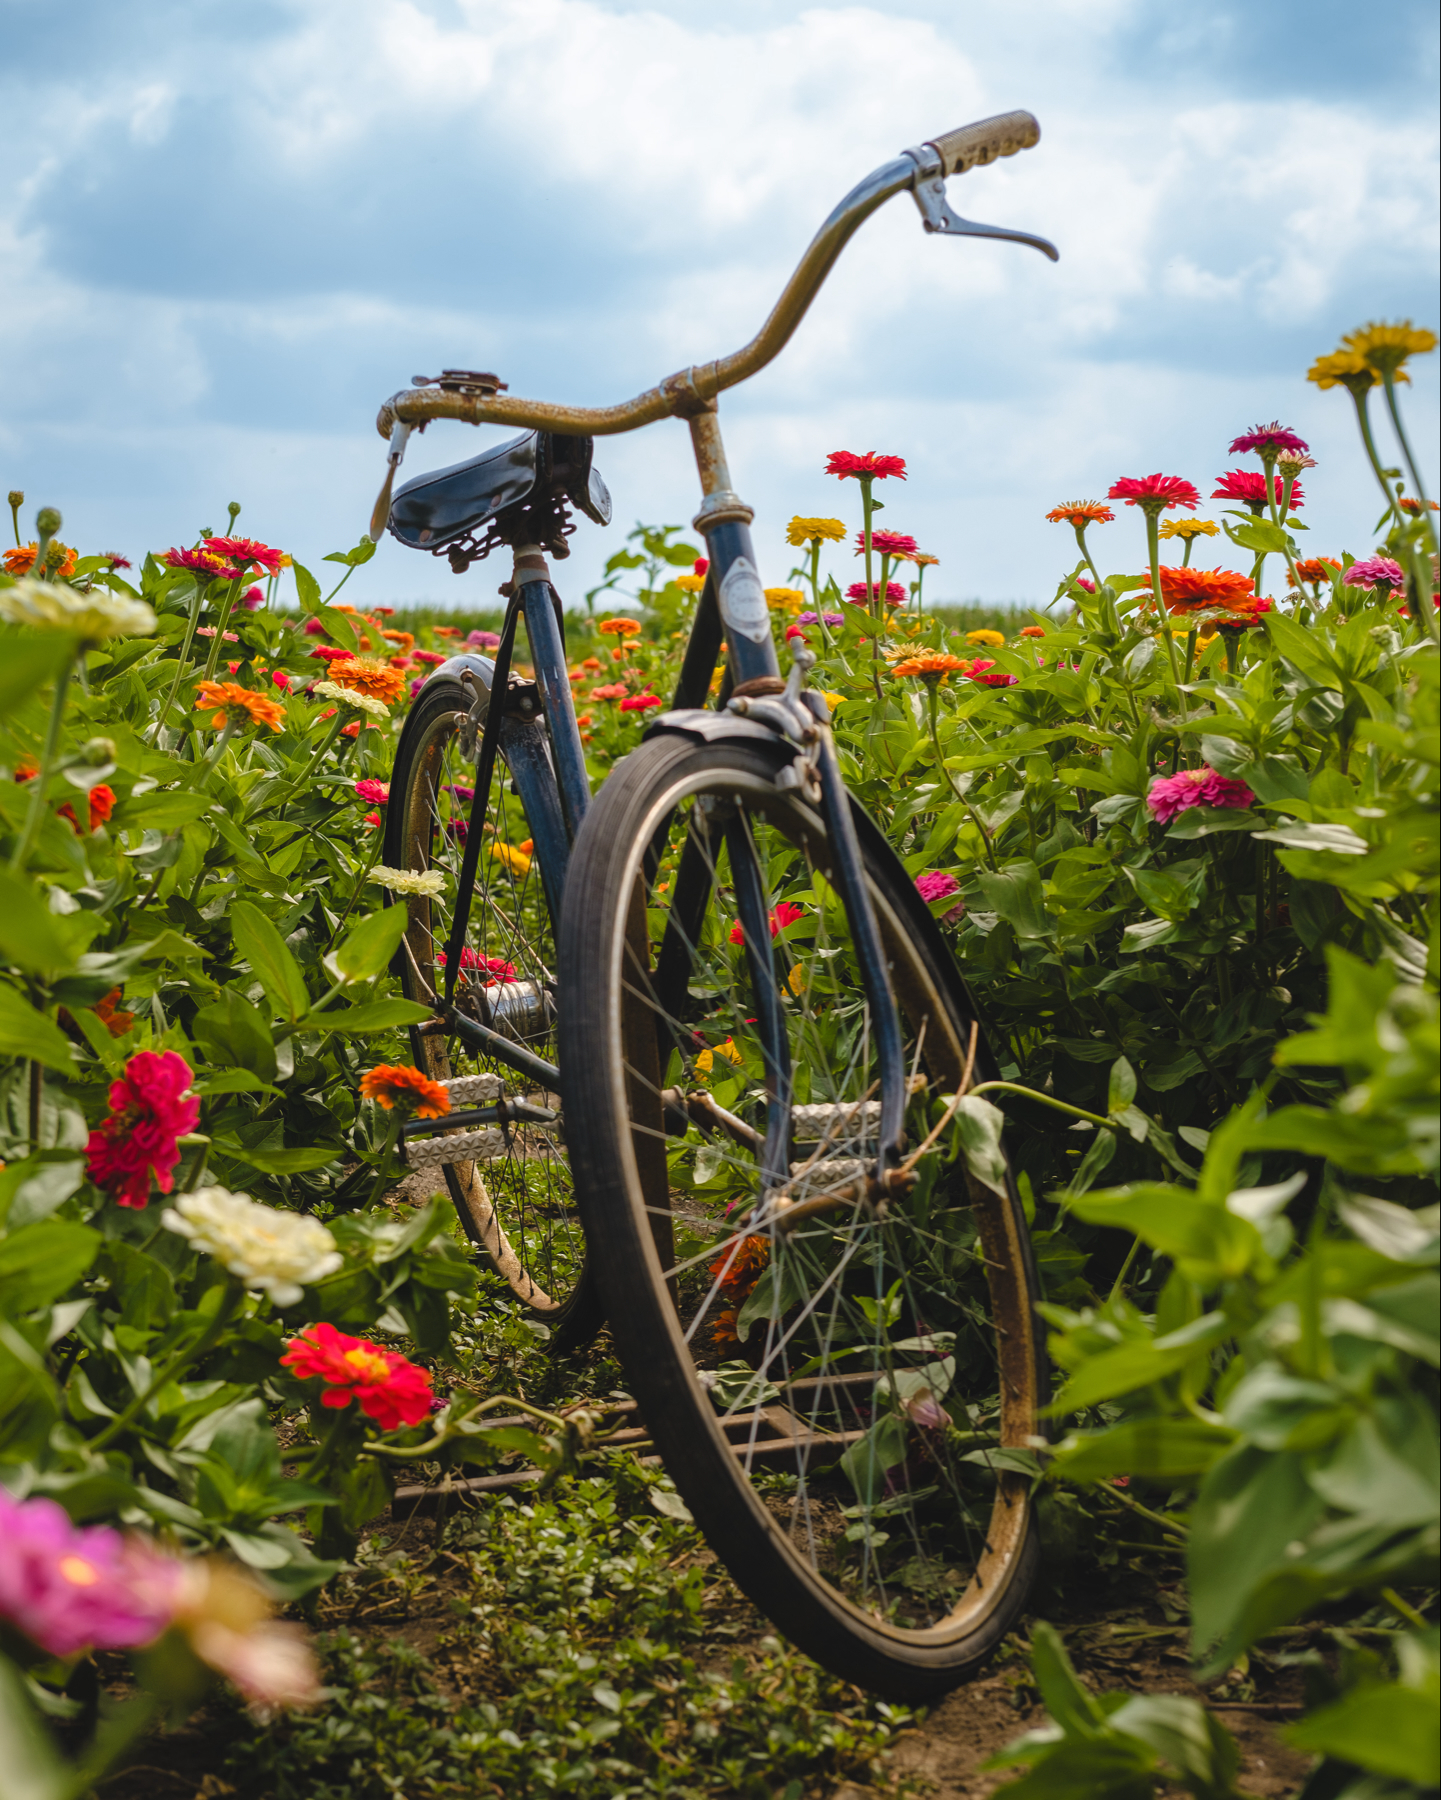 An old bicycle stands among colorful zinnia flowers under a blue sky with white clouds.